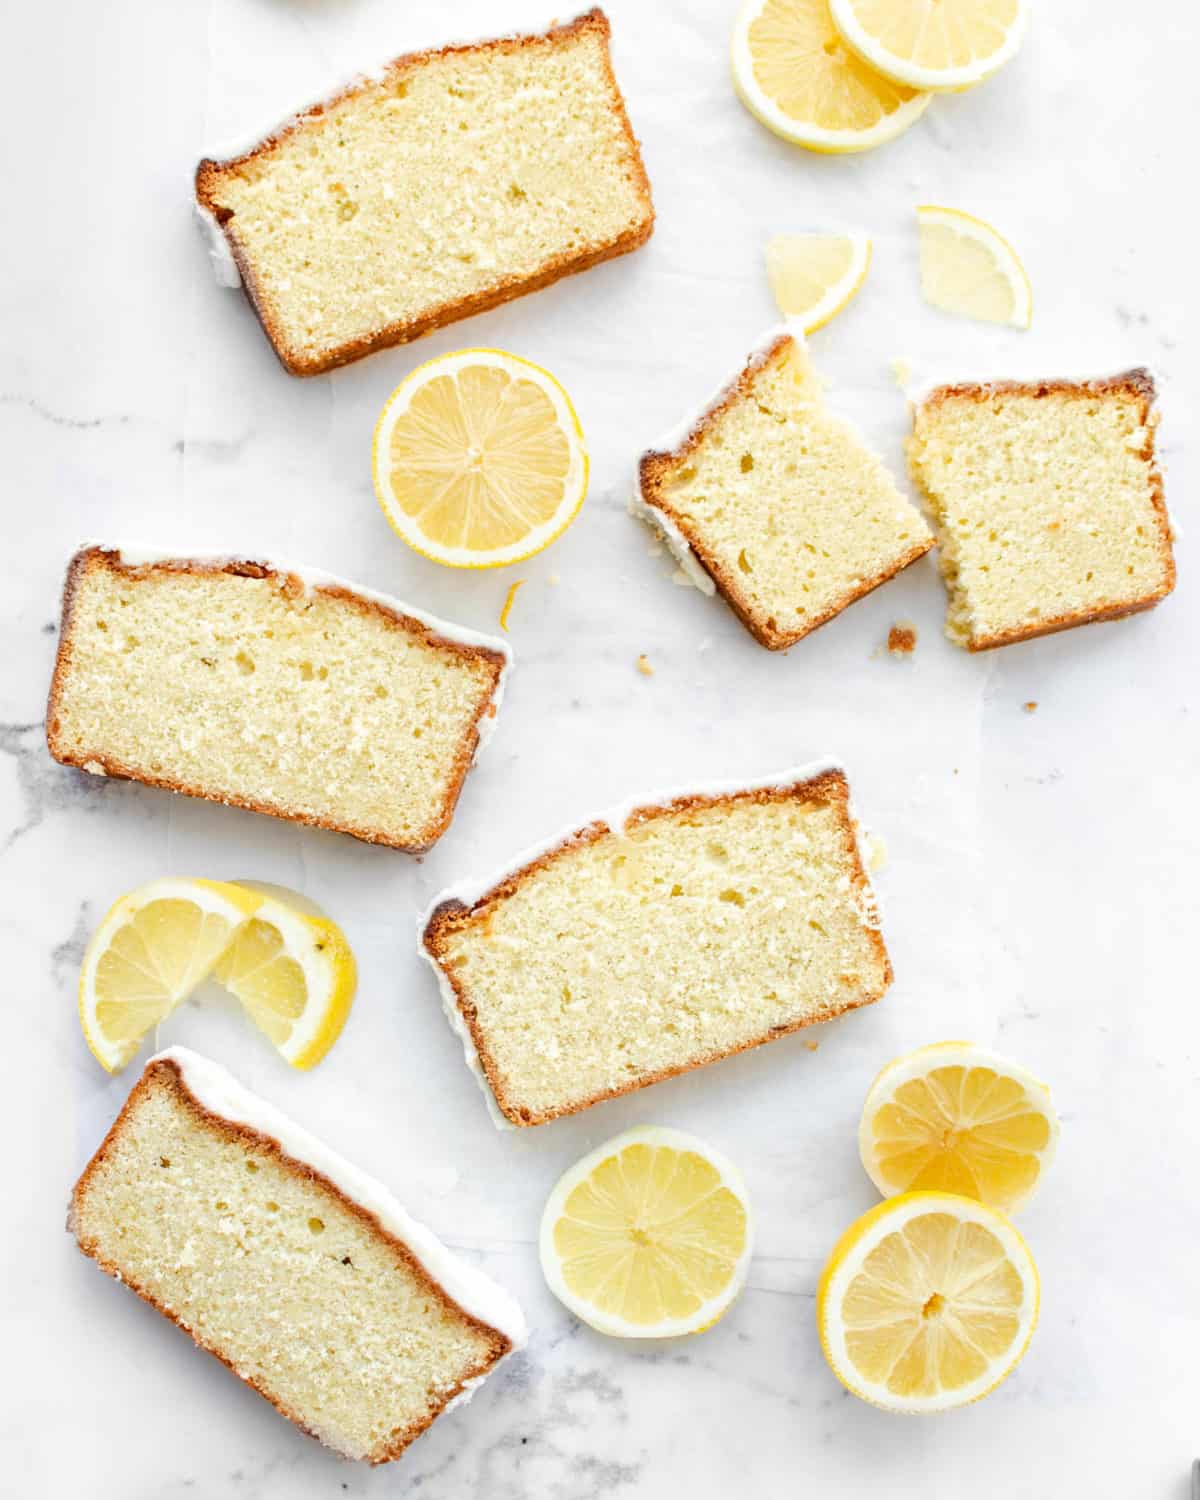 Multiple slices of lemon pound cake on a table.